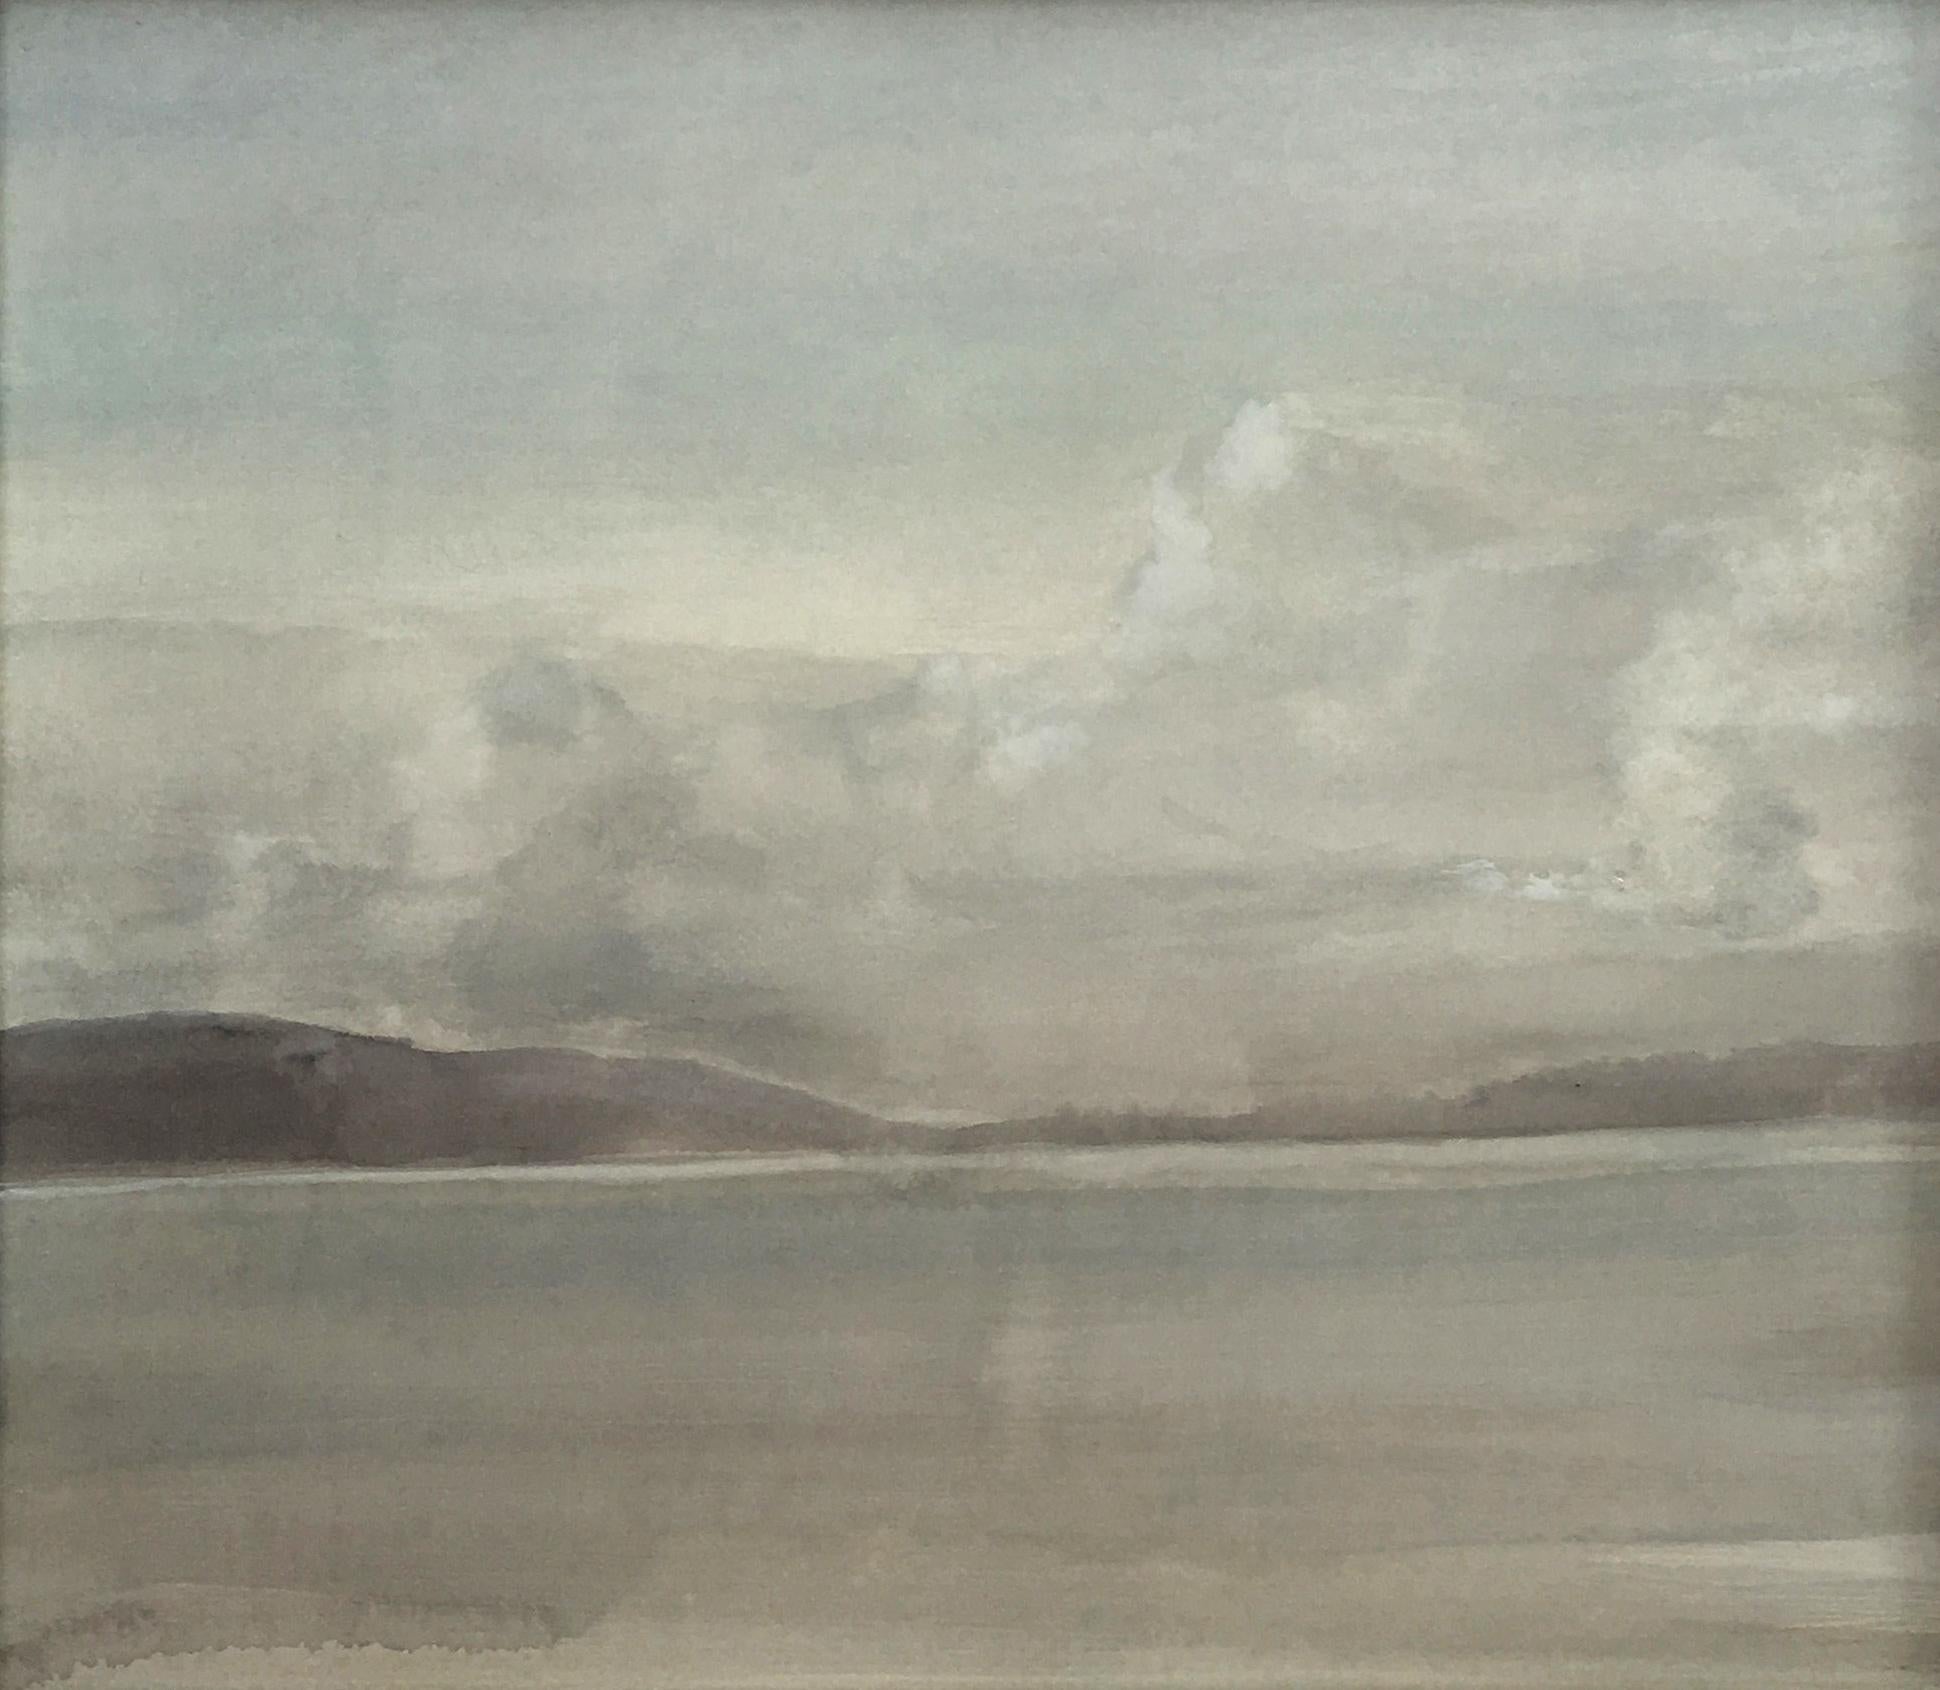 Clouds over Narrows (Lake Champlain) - Painting by Ellen Phelan